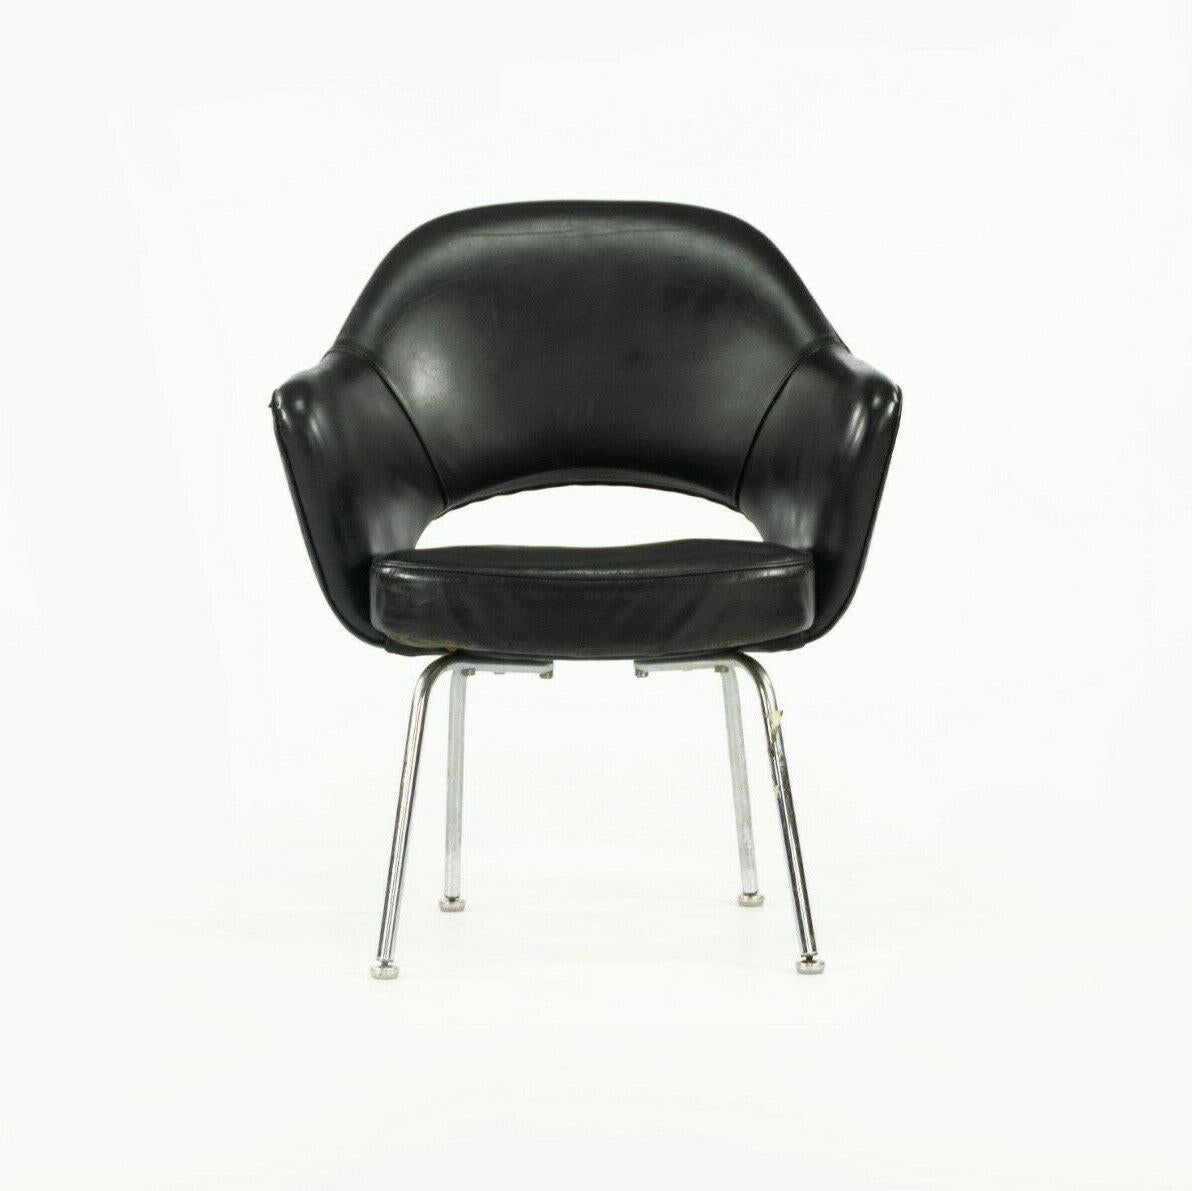 Listed for sale is a 1960s executive armchair No. 71 USB designed by Eero Saarinen and produced by Knoll. This particular example retains part of its original 320 Park Avenue label, dating it to the 1960s. It was specified in black leather, which is